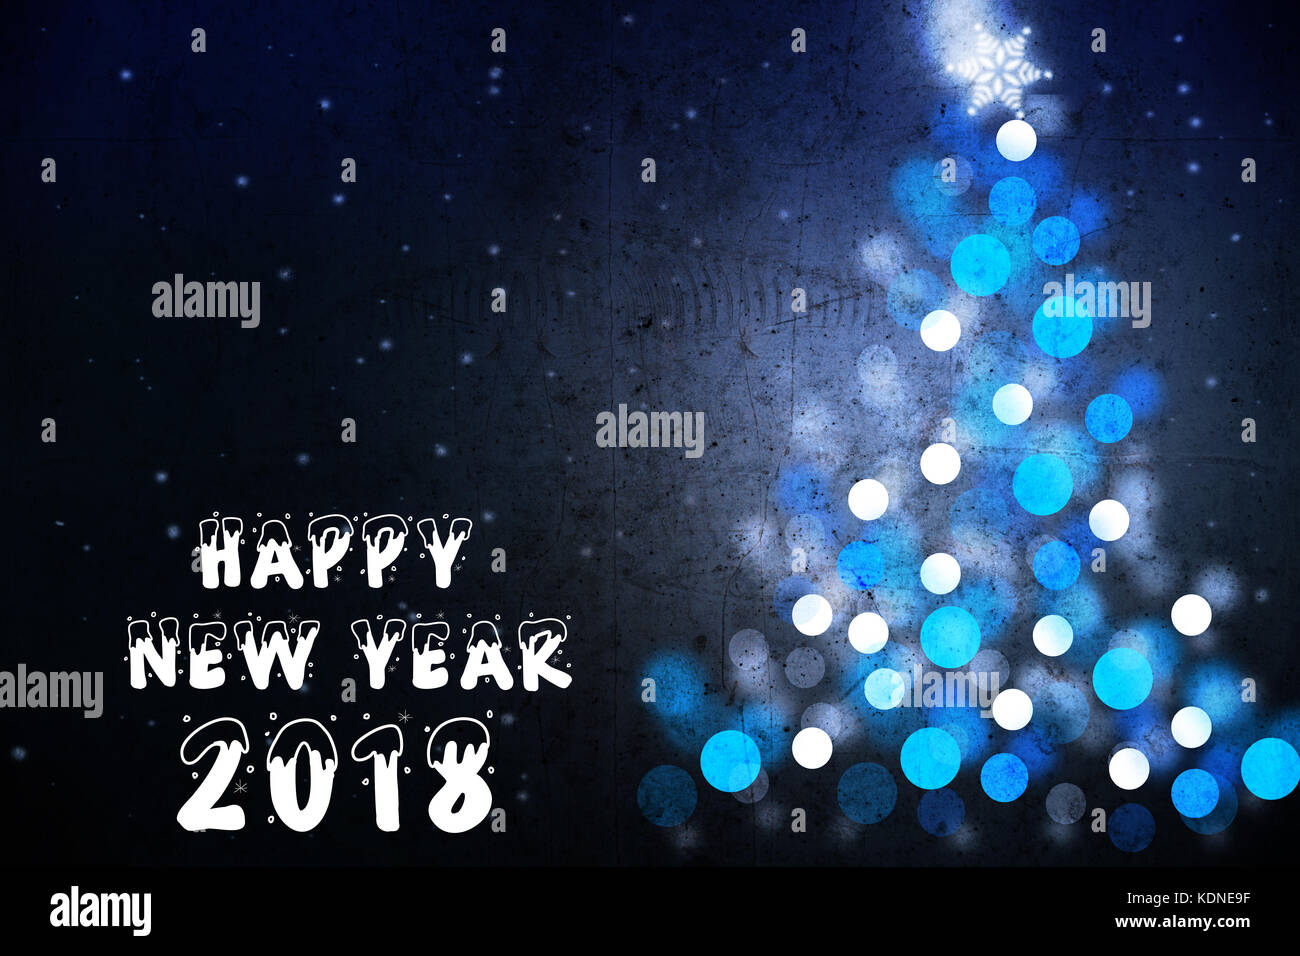 Happy New Year 2018 greeting card with blue Christmas tree silhouette Stock Photo